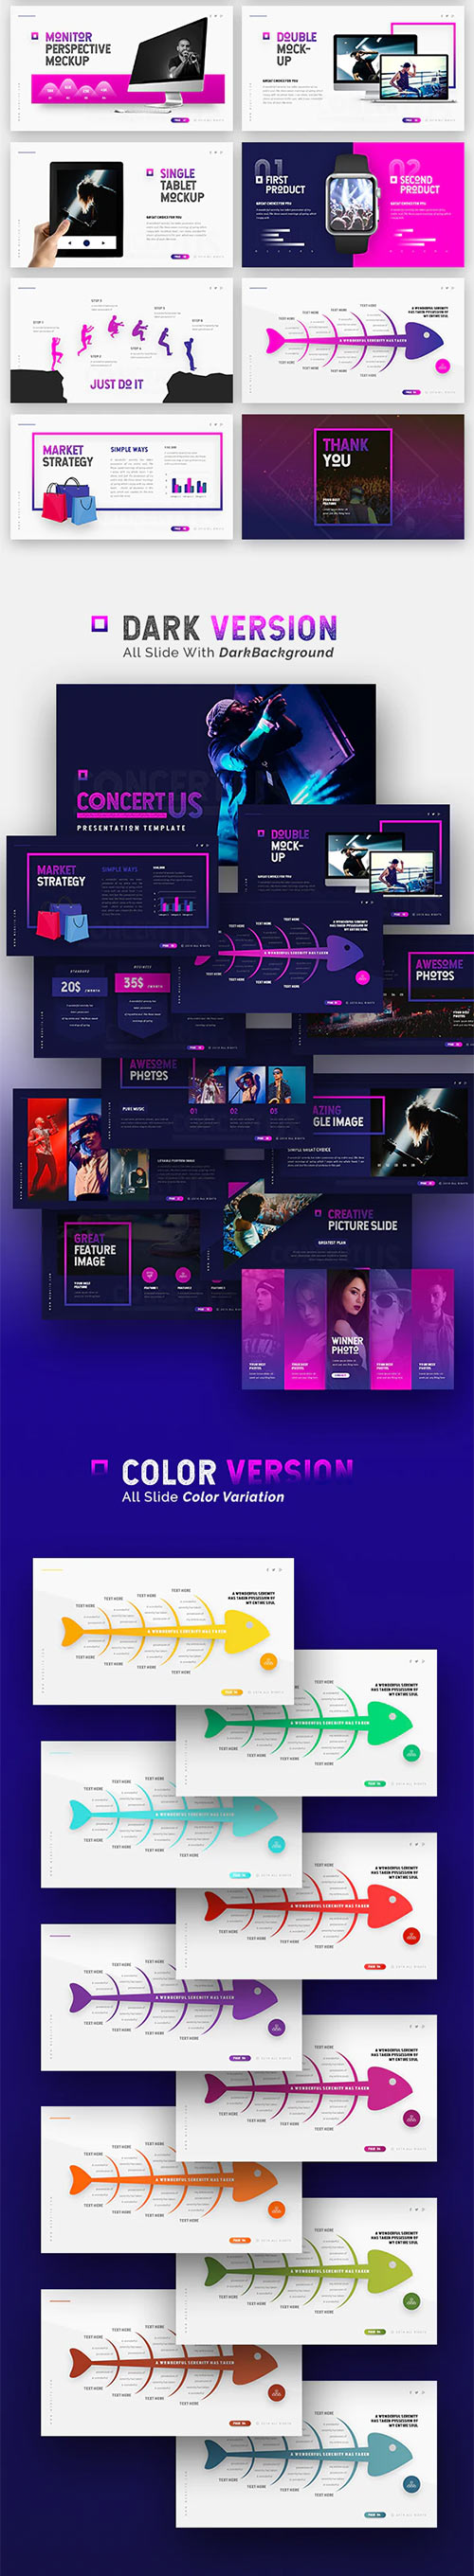 Concertus - Event Powerpoint Template